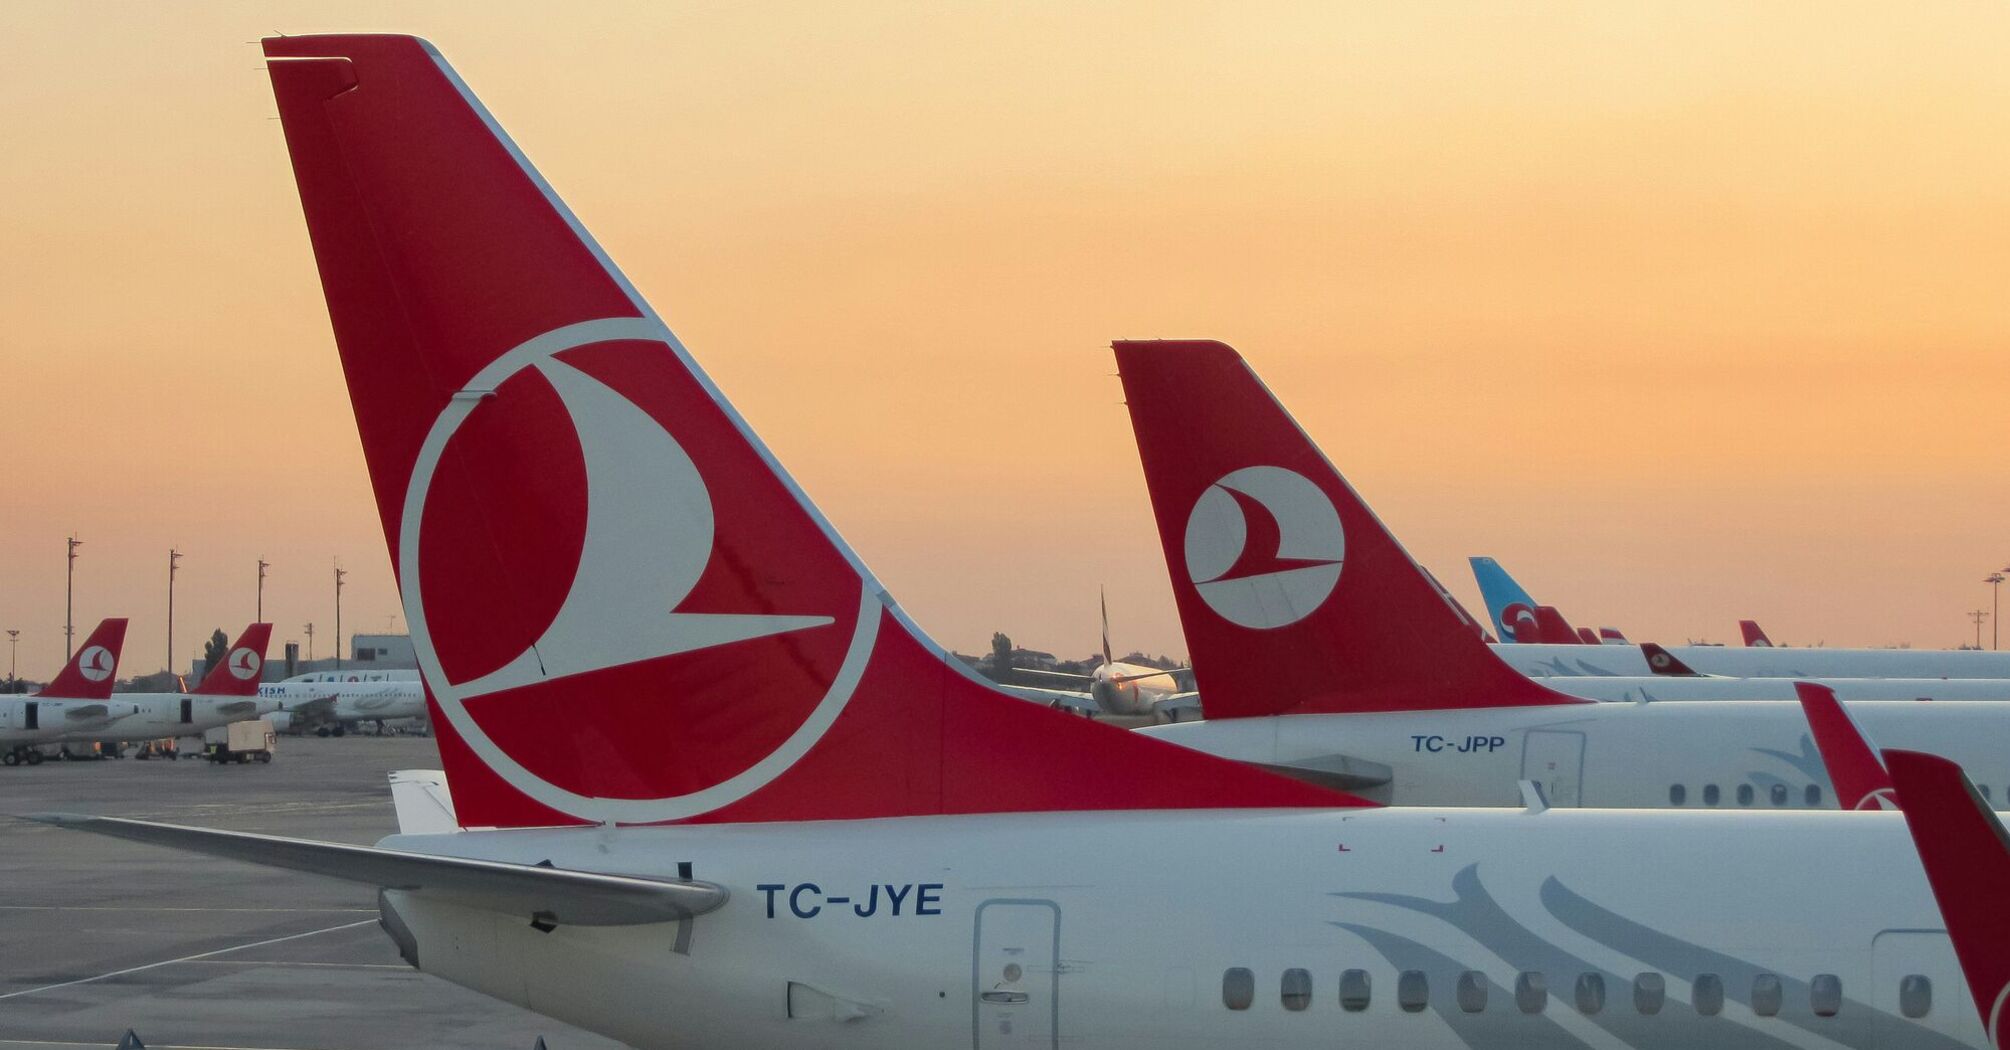 Tail fins of Turkish Airlines aircraft at sunset